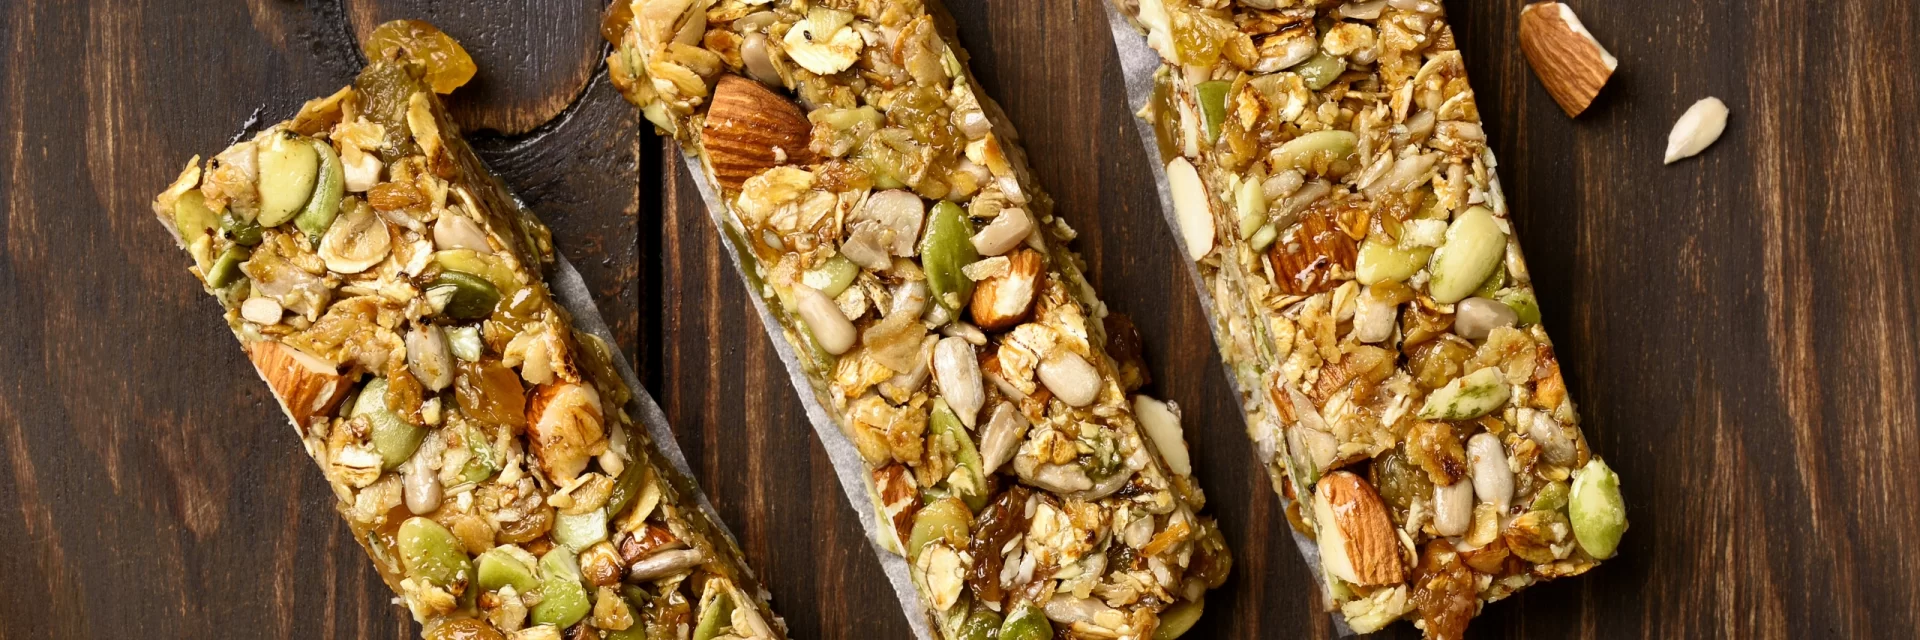 Nutritional criteria for the Best healthy snack bars